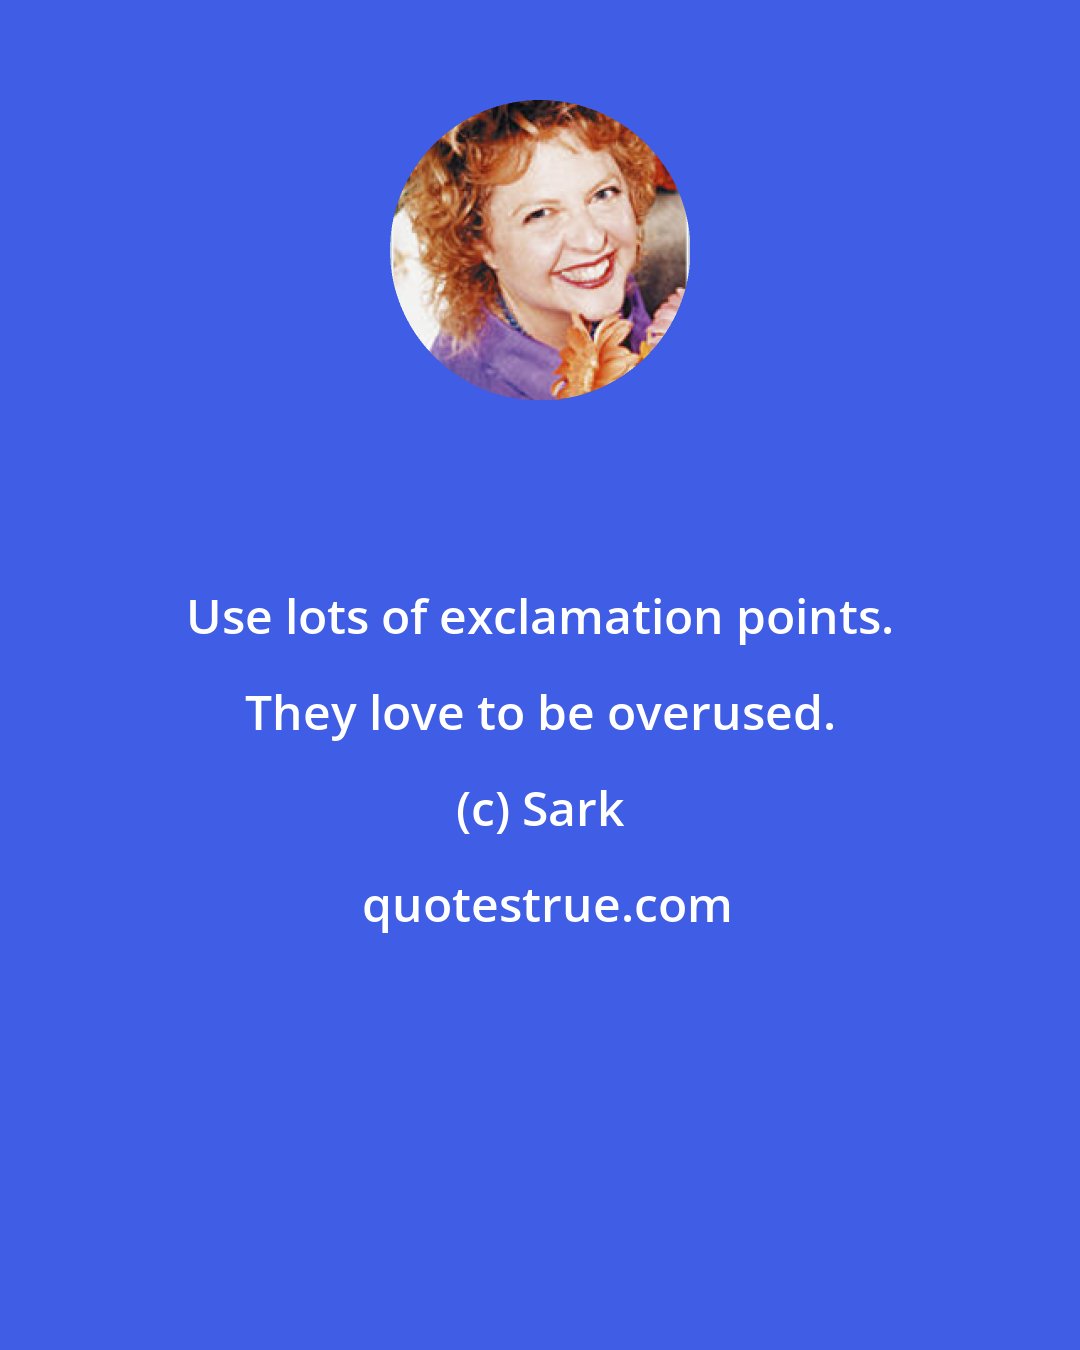 Sark: Use lots of exclamation points. They love to be overused.